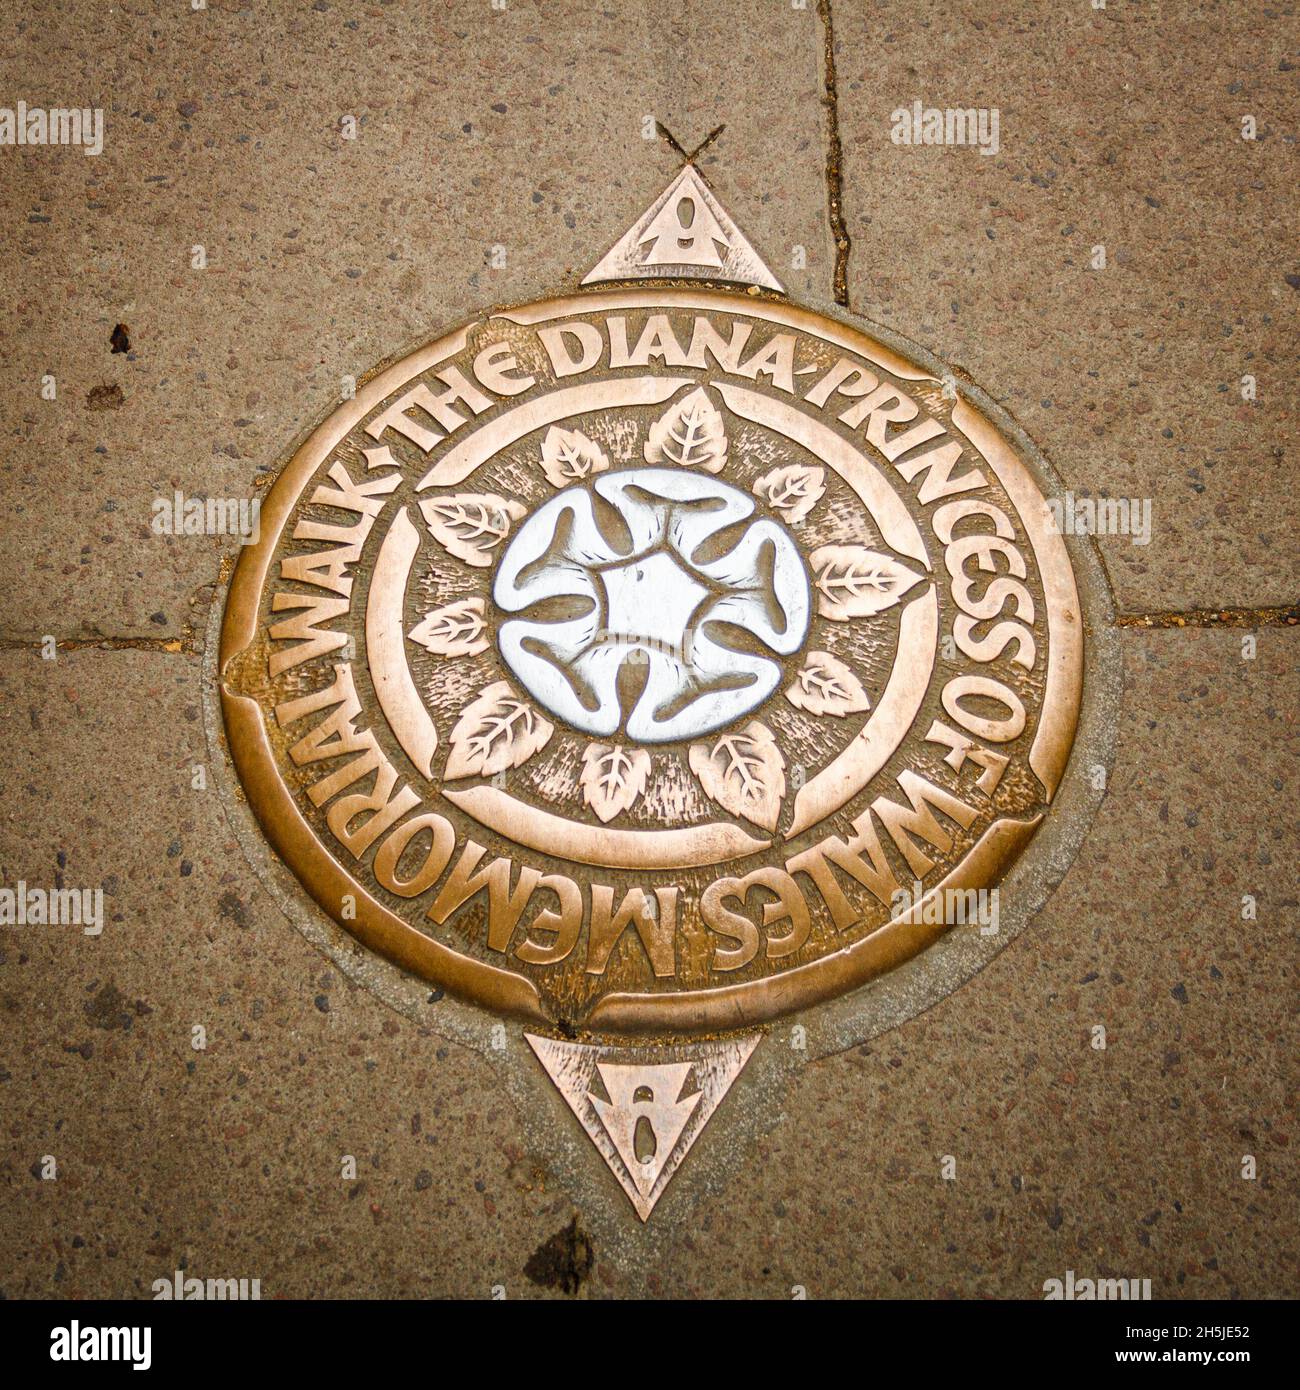 London, United Kingdom; March 15th 2011: Plaque from the Diana of Wales memorial walk. Stock Photo